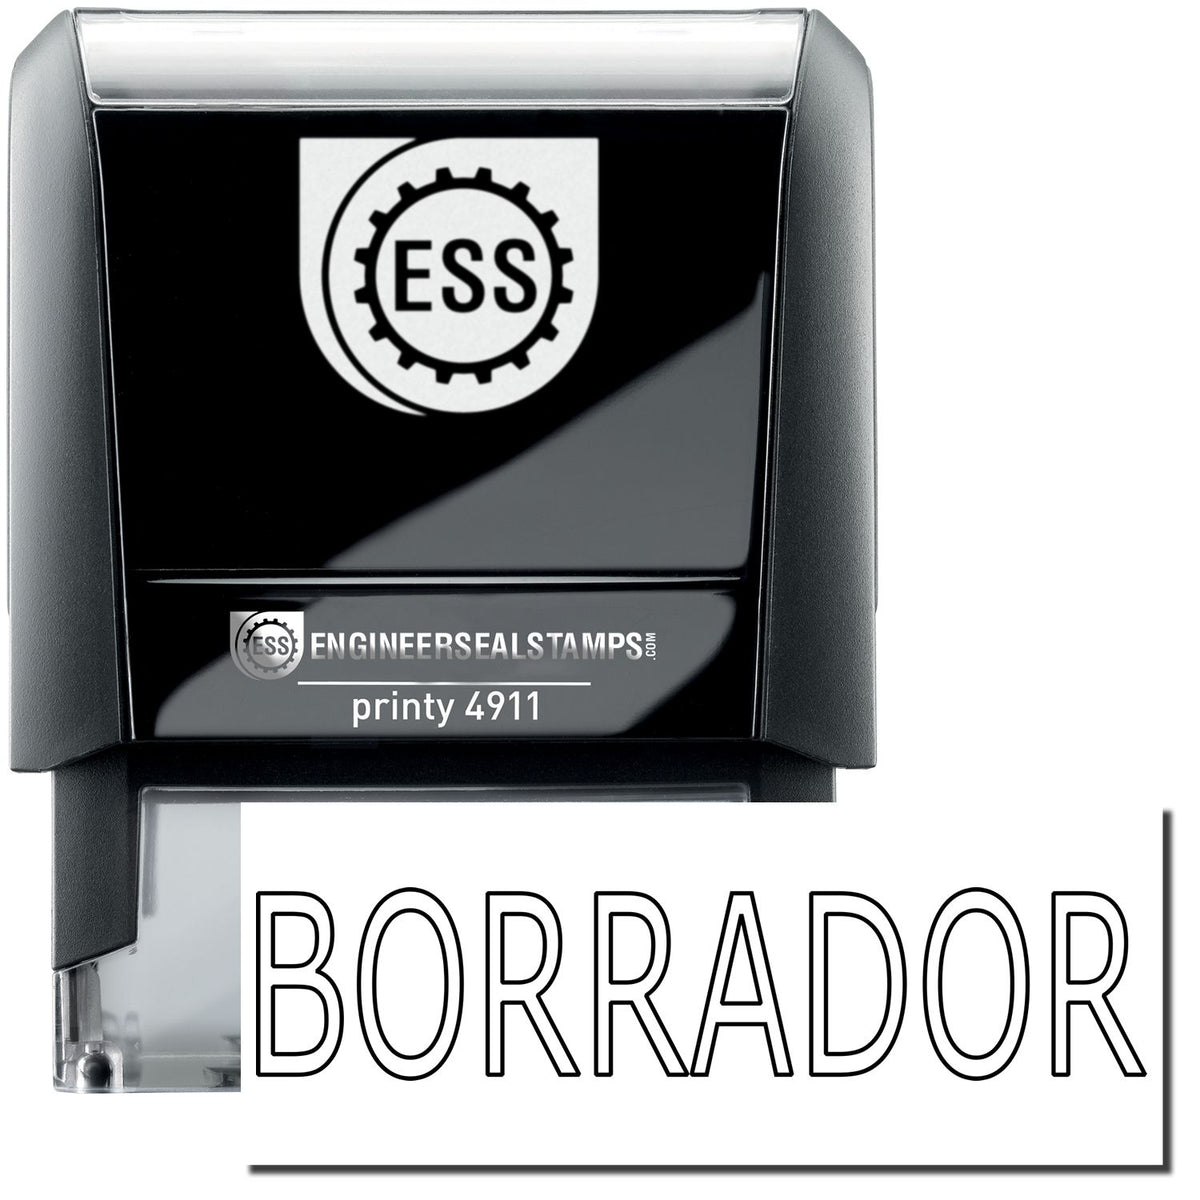 A self-inking stamp with a stamped image showing how the text &quot;BORRADOR&quot; in an outline style is displayed after stamping.